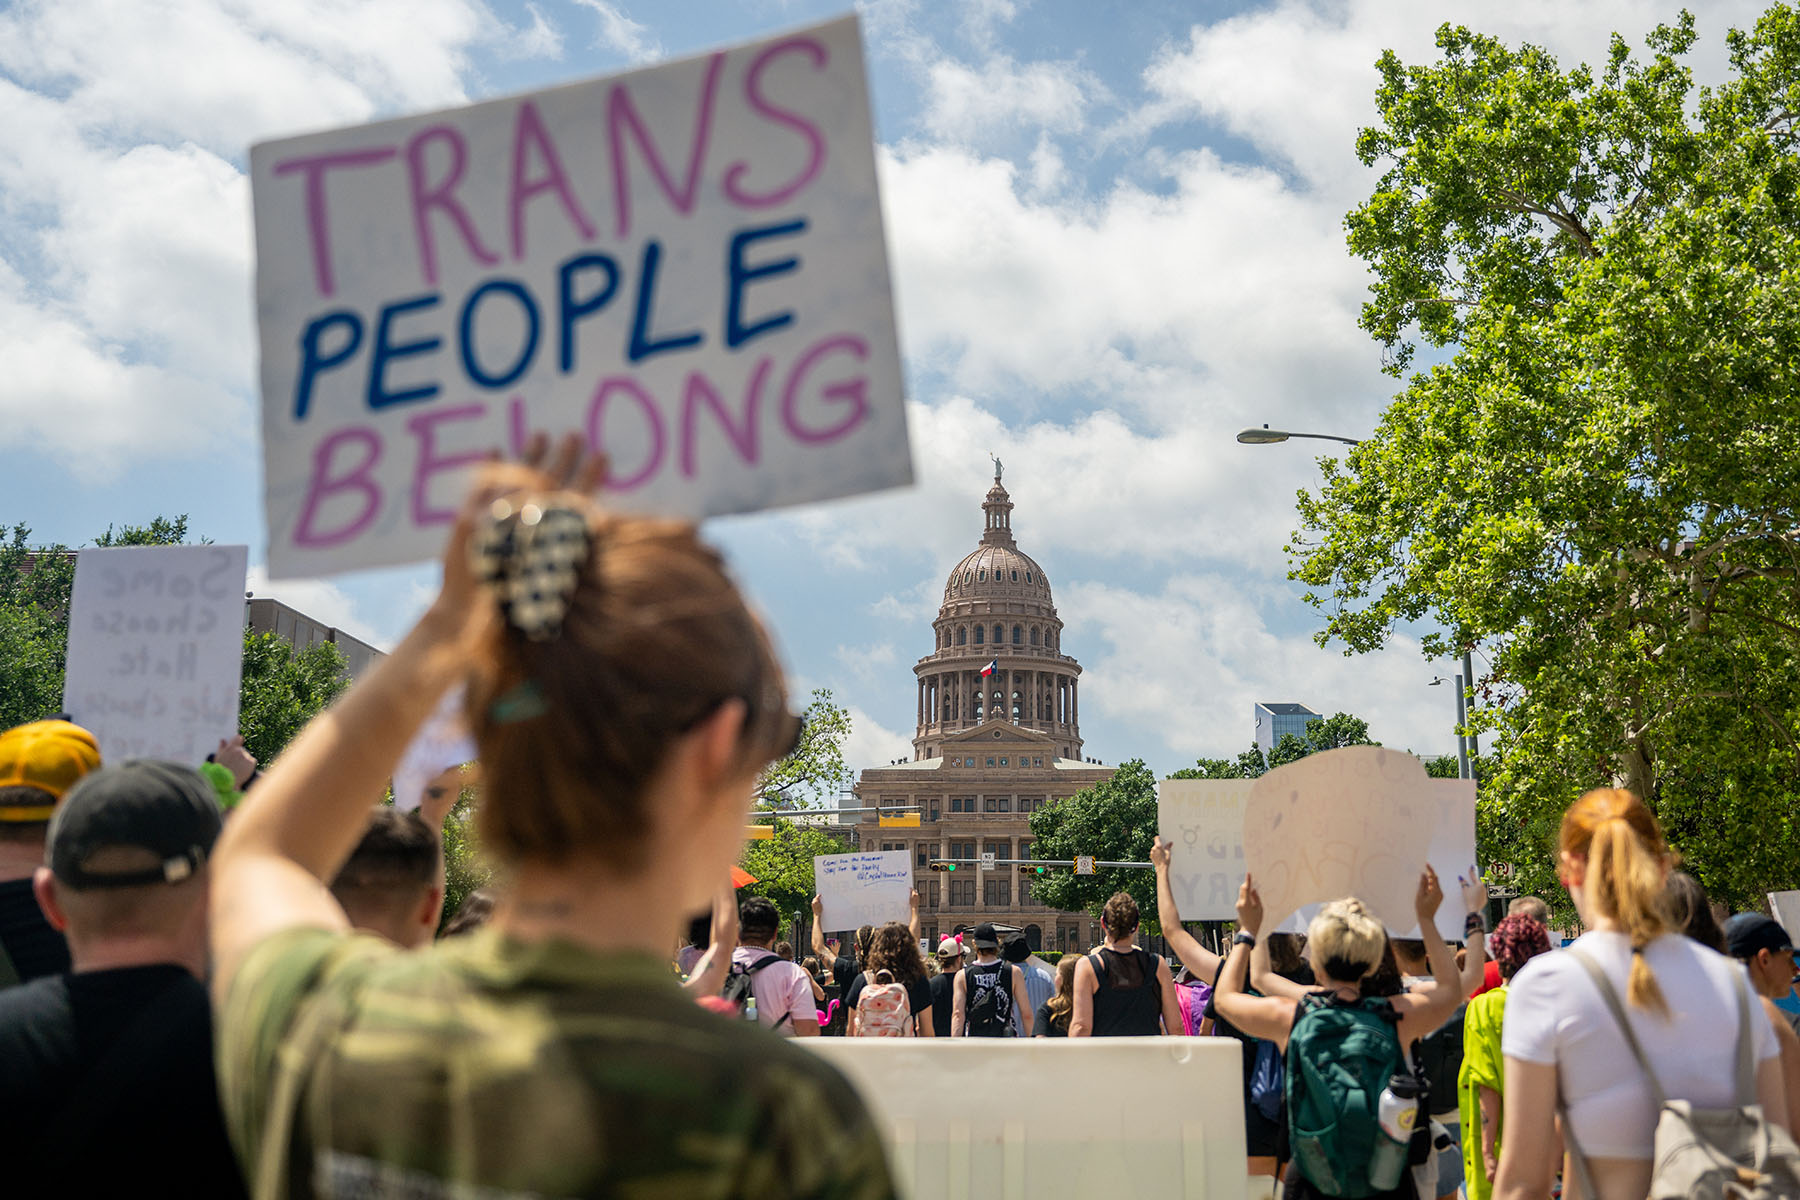 A protesters holds up a sign that reads "Trans People Belong" as the Texas State Capitol can be seen in the background.